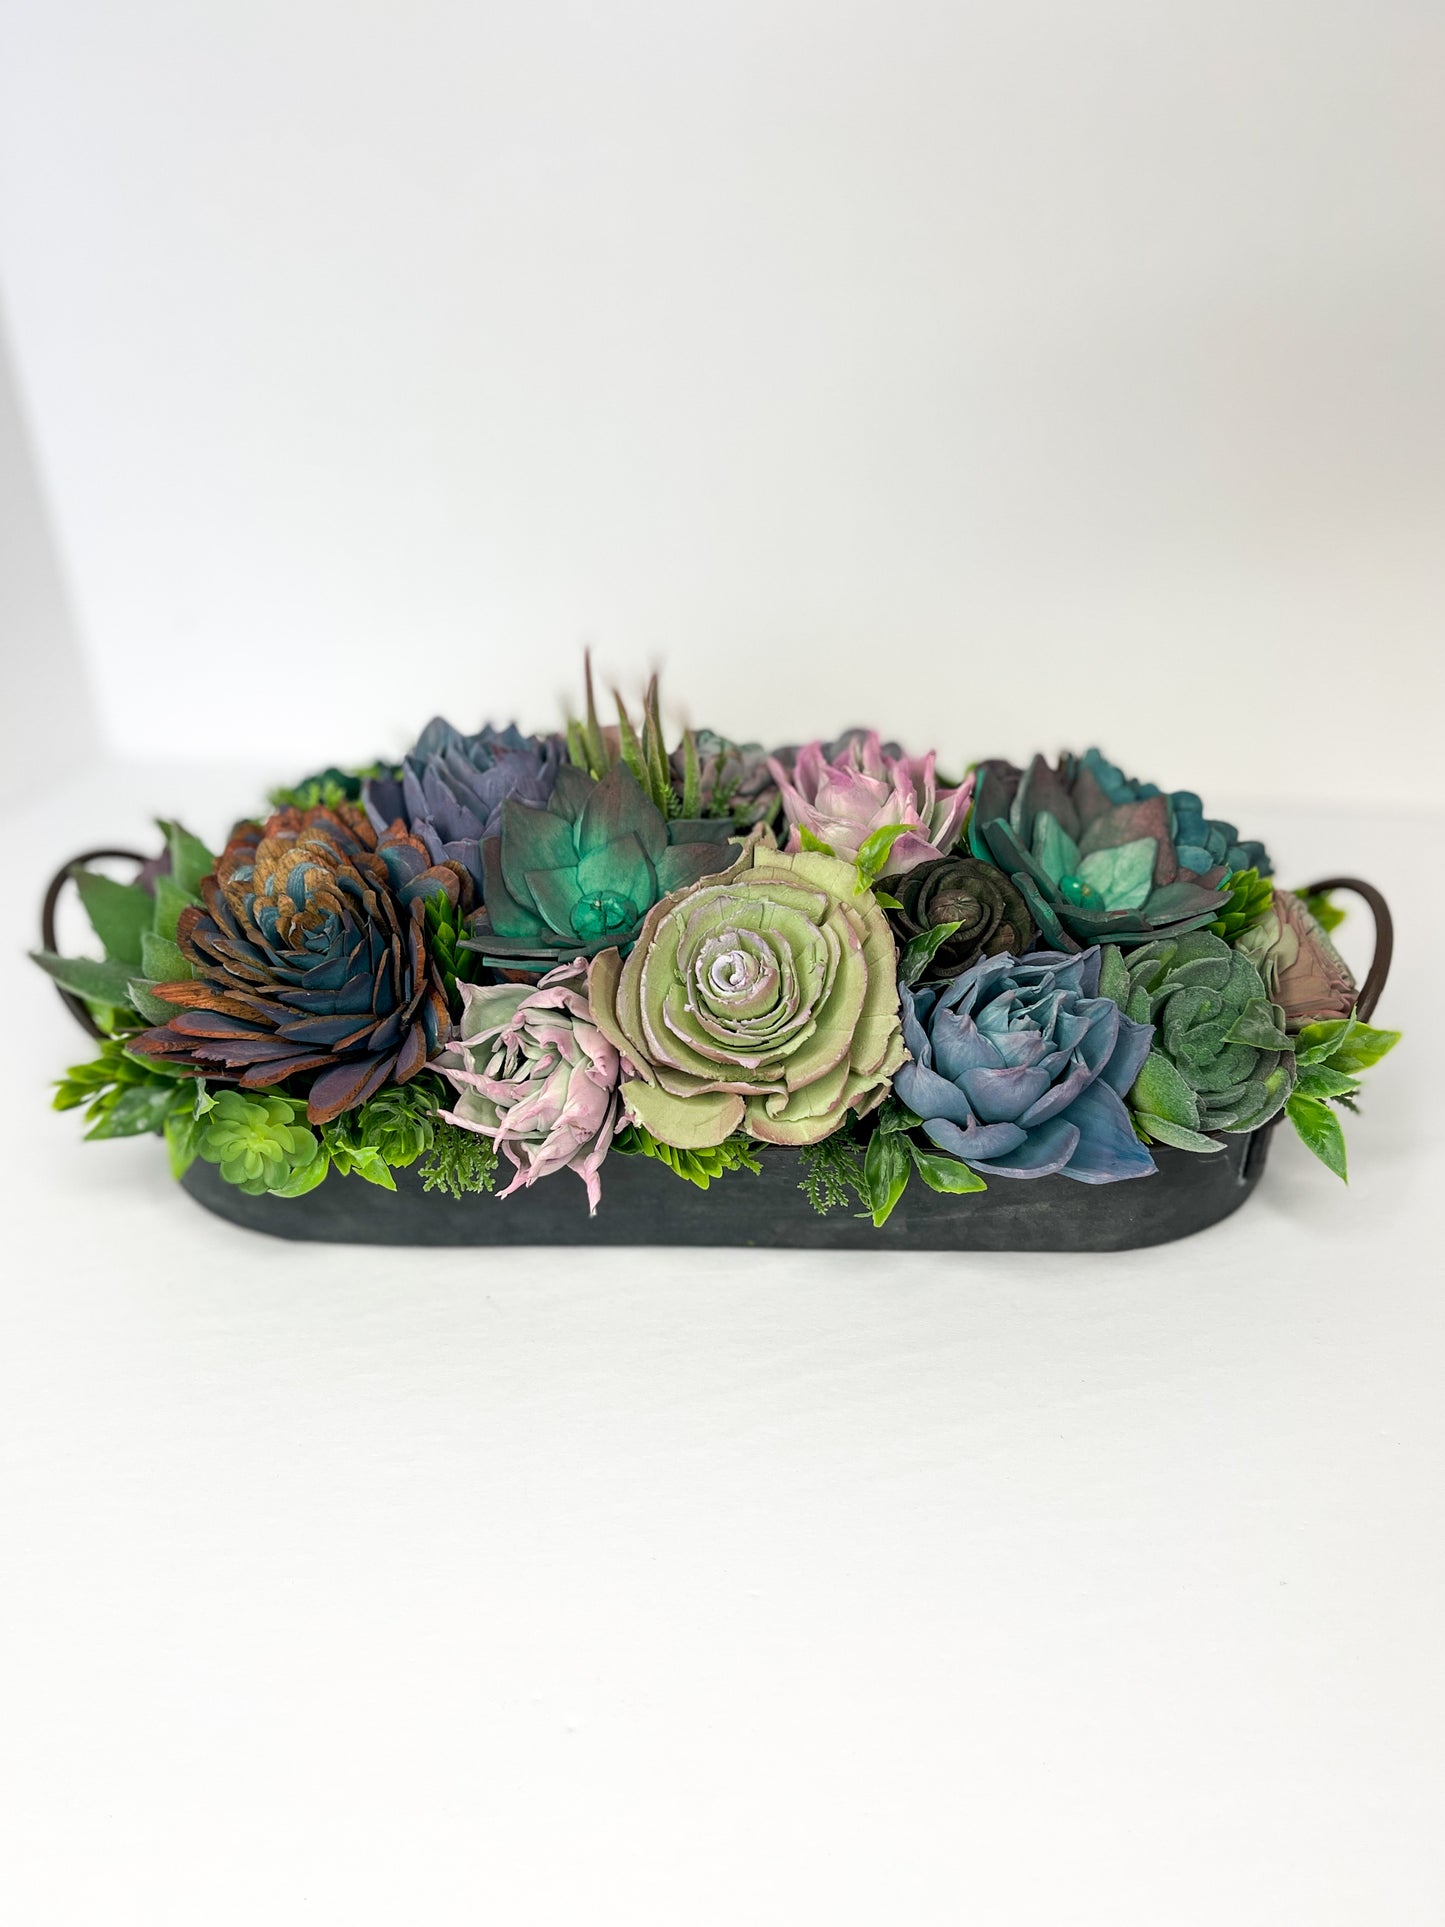 Imperial Majesty Succulent Garden